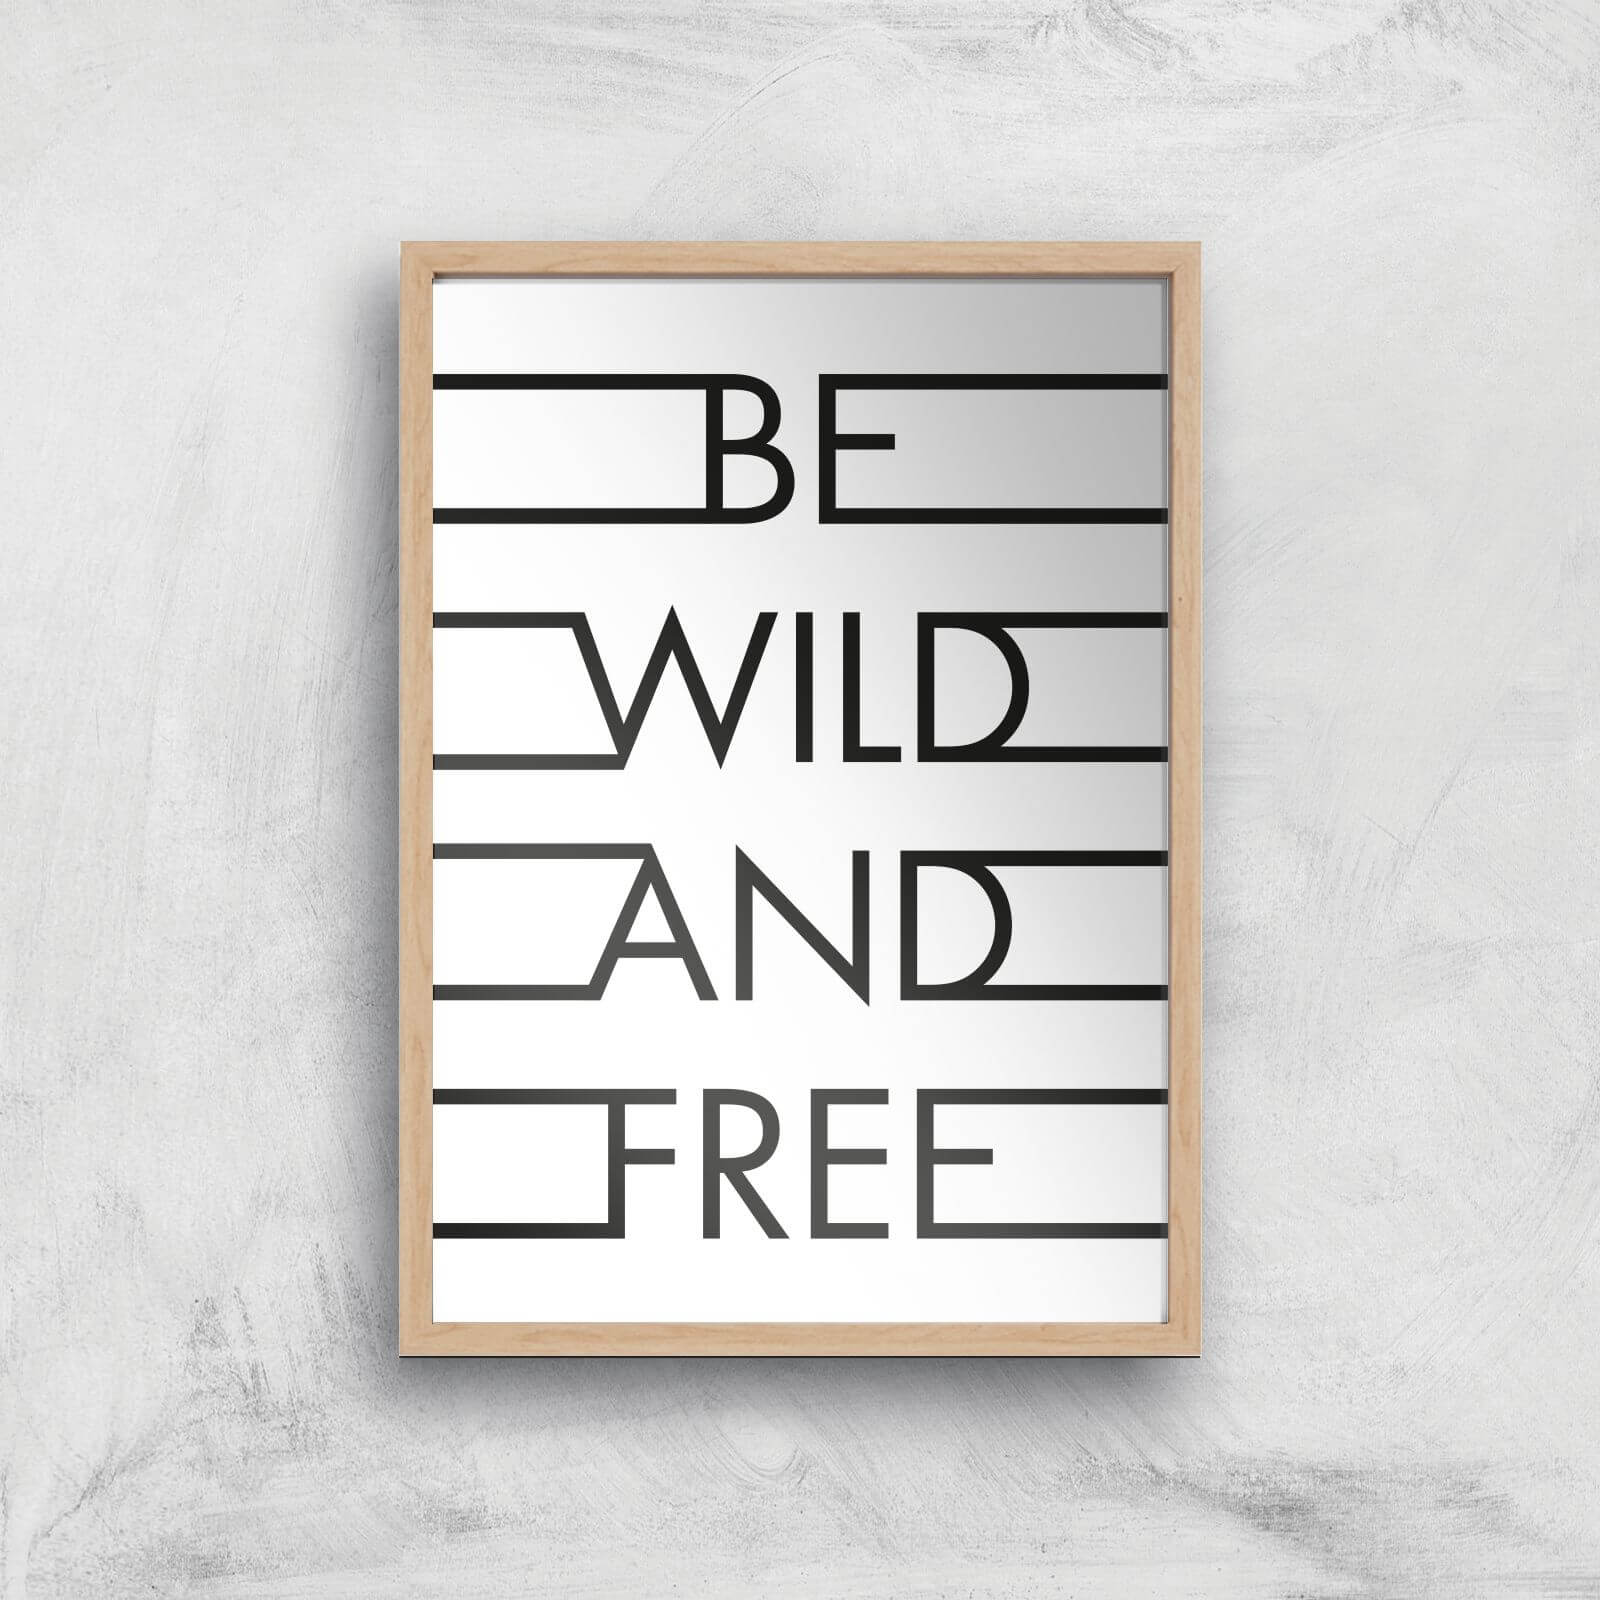 Be Wild & Free Giclee Art Print - A4 - Wooden Frame